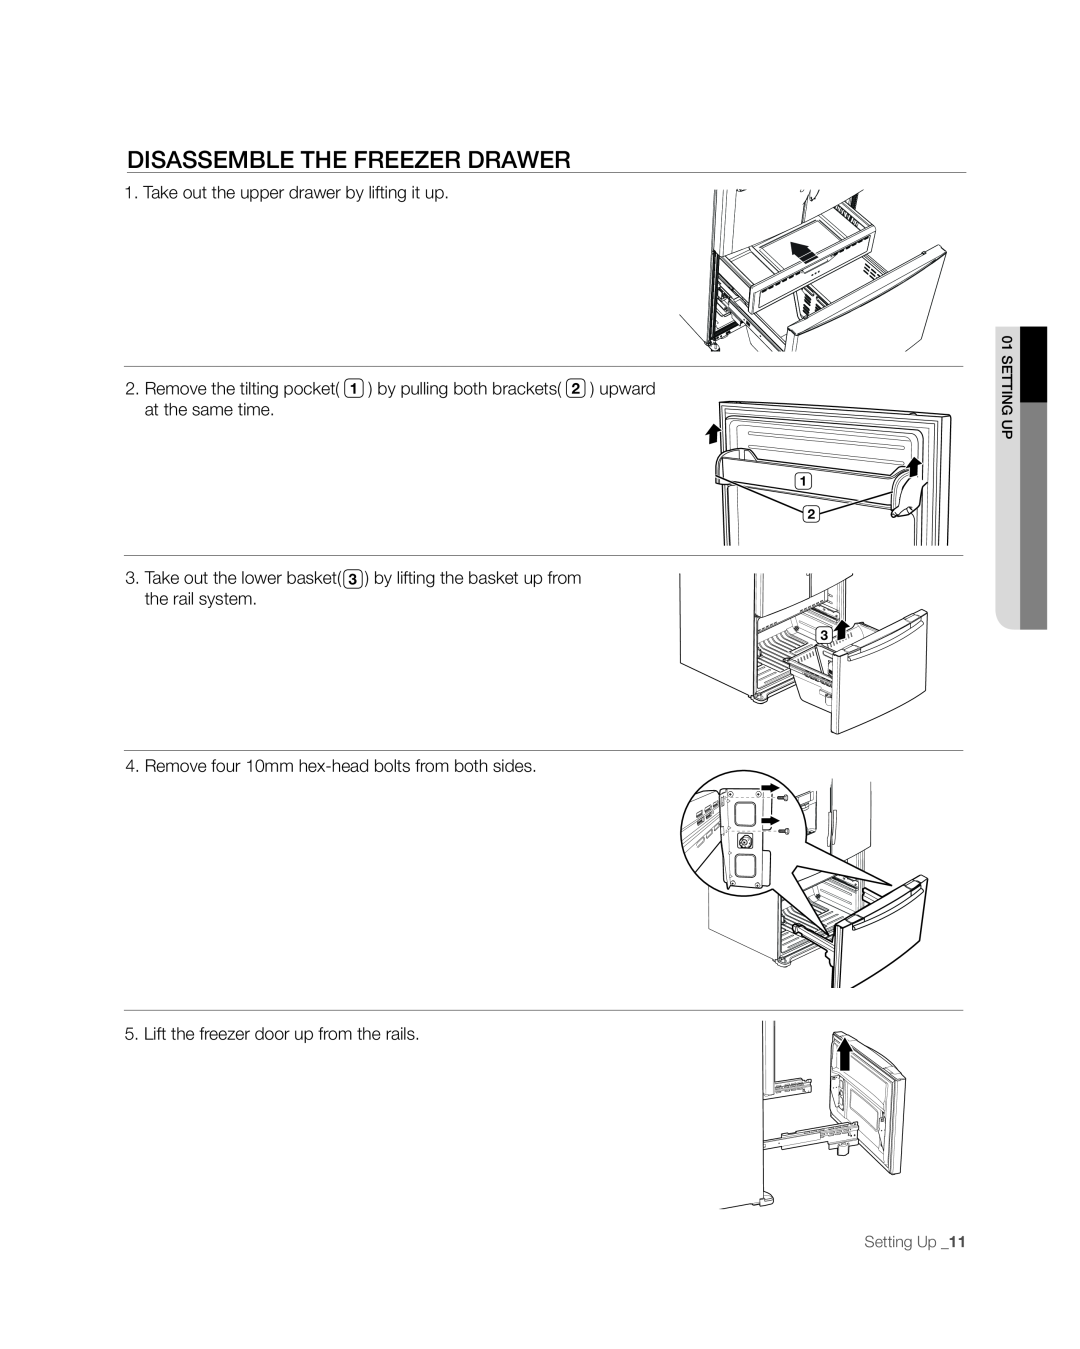 Samsung RFG297AAWP user manual disassemble the freezer drawer, Take out the upper drawer by lifting it up, Setting Up 